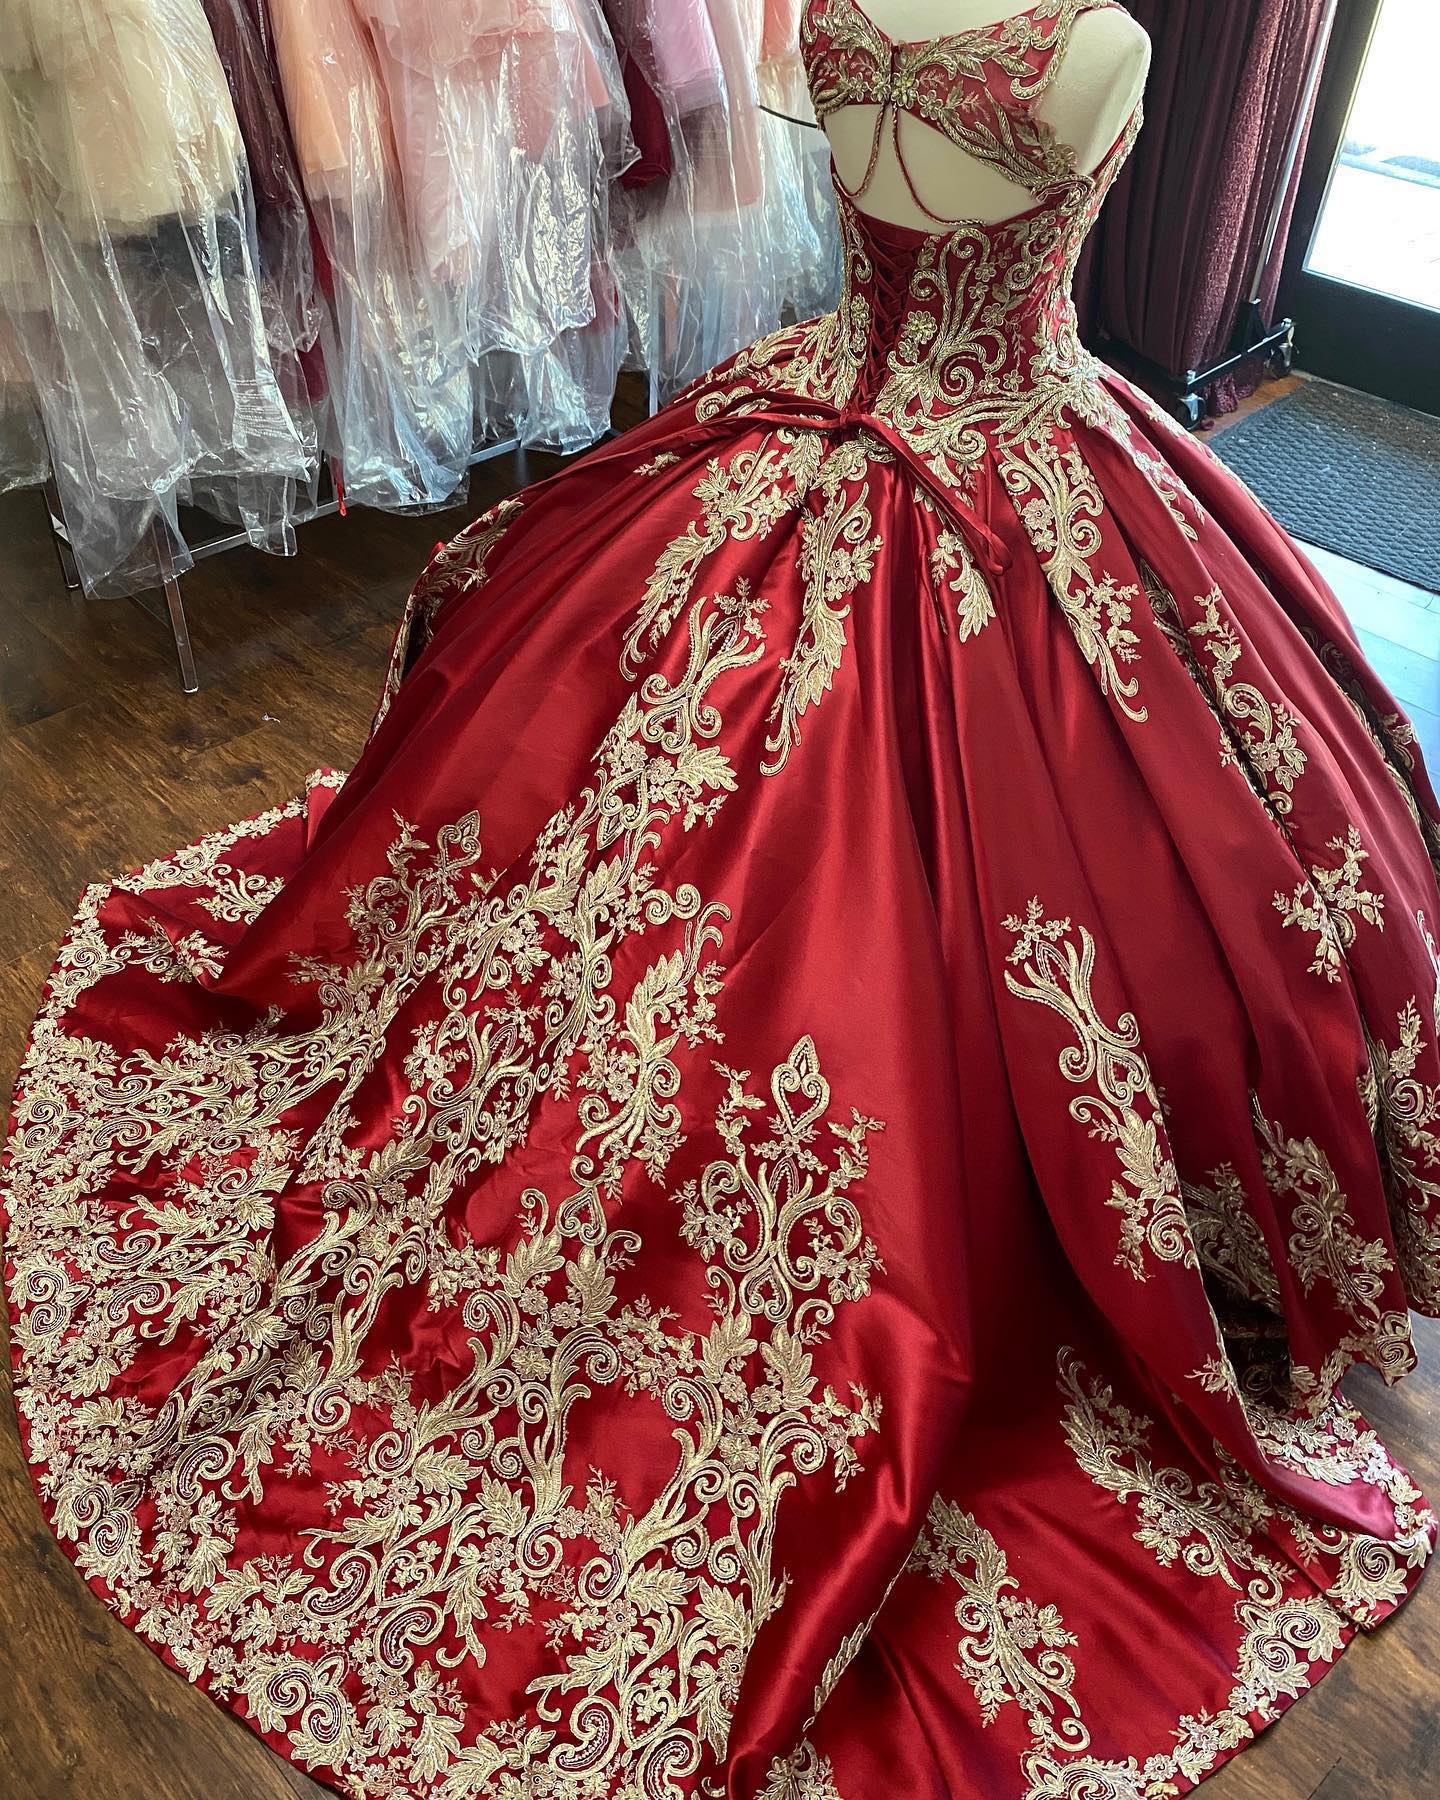 red and gold quinceanera dress,satin quinceanera dress,embroidery quinceanera dress,red quinceanera with gold embroidery,quince dress with straps,designer quinceanera dress,quinceanera dress wholesale suppliers,custom make your quinceanera dress,